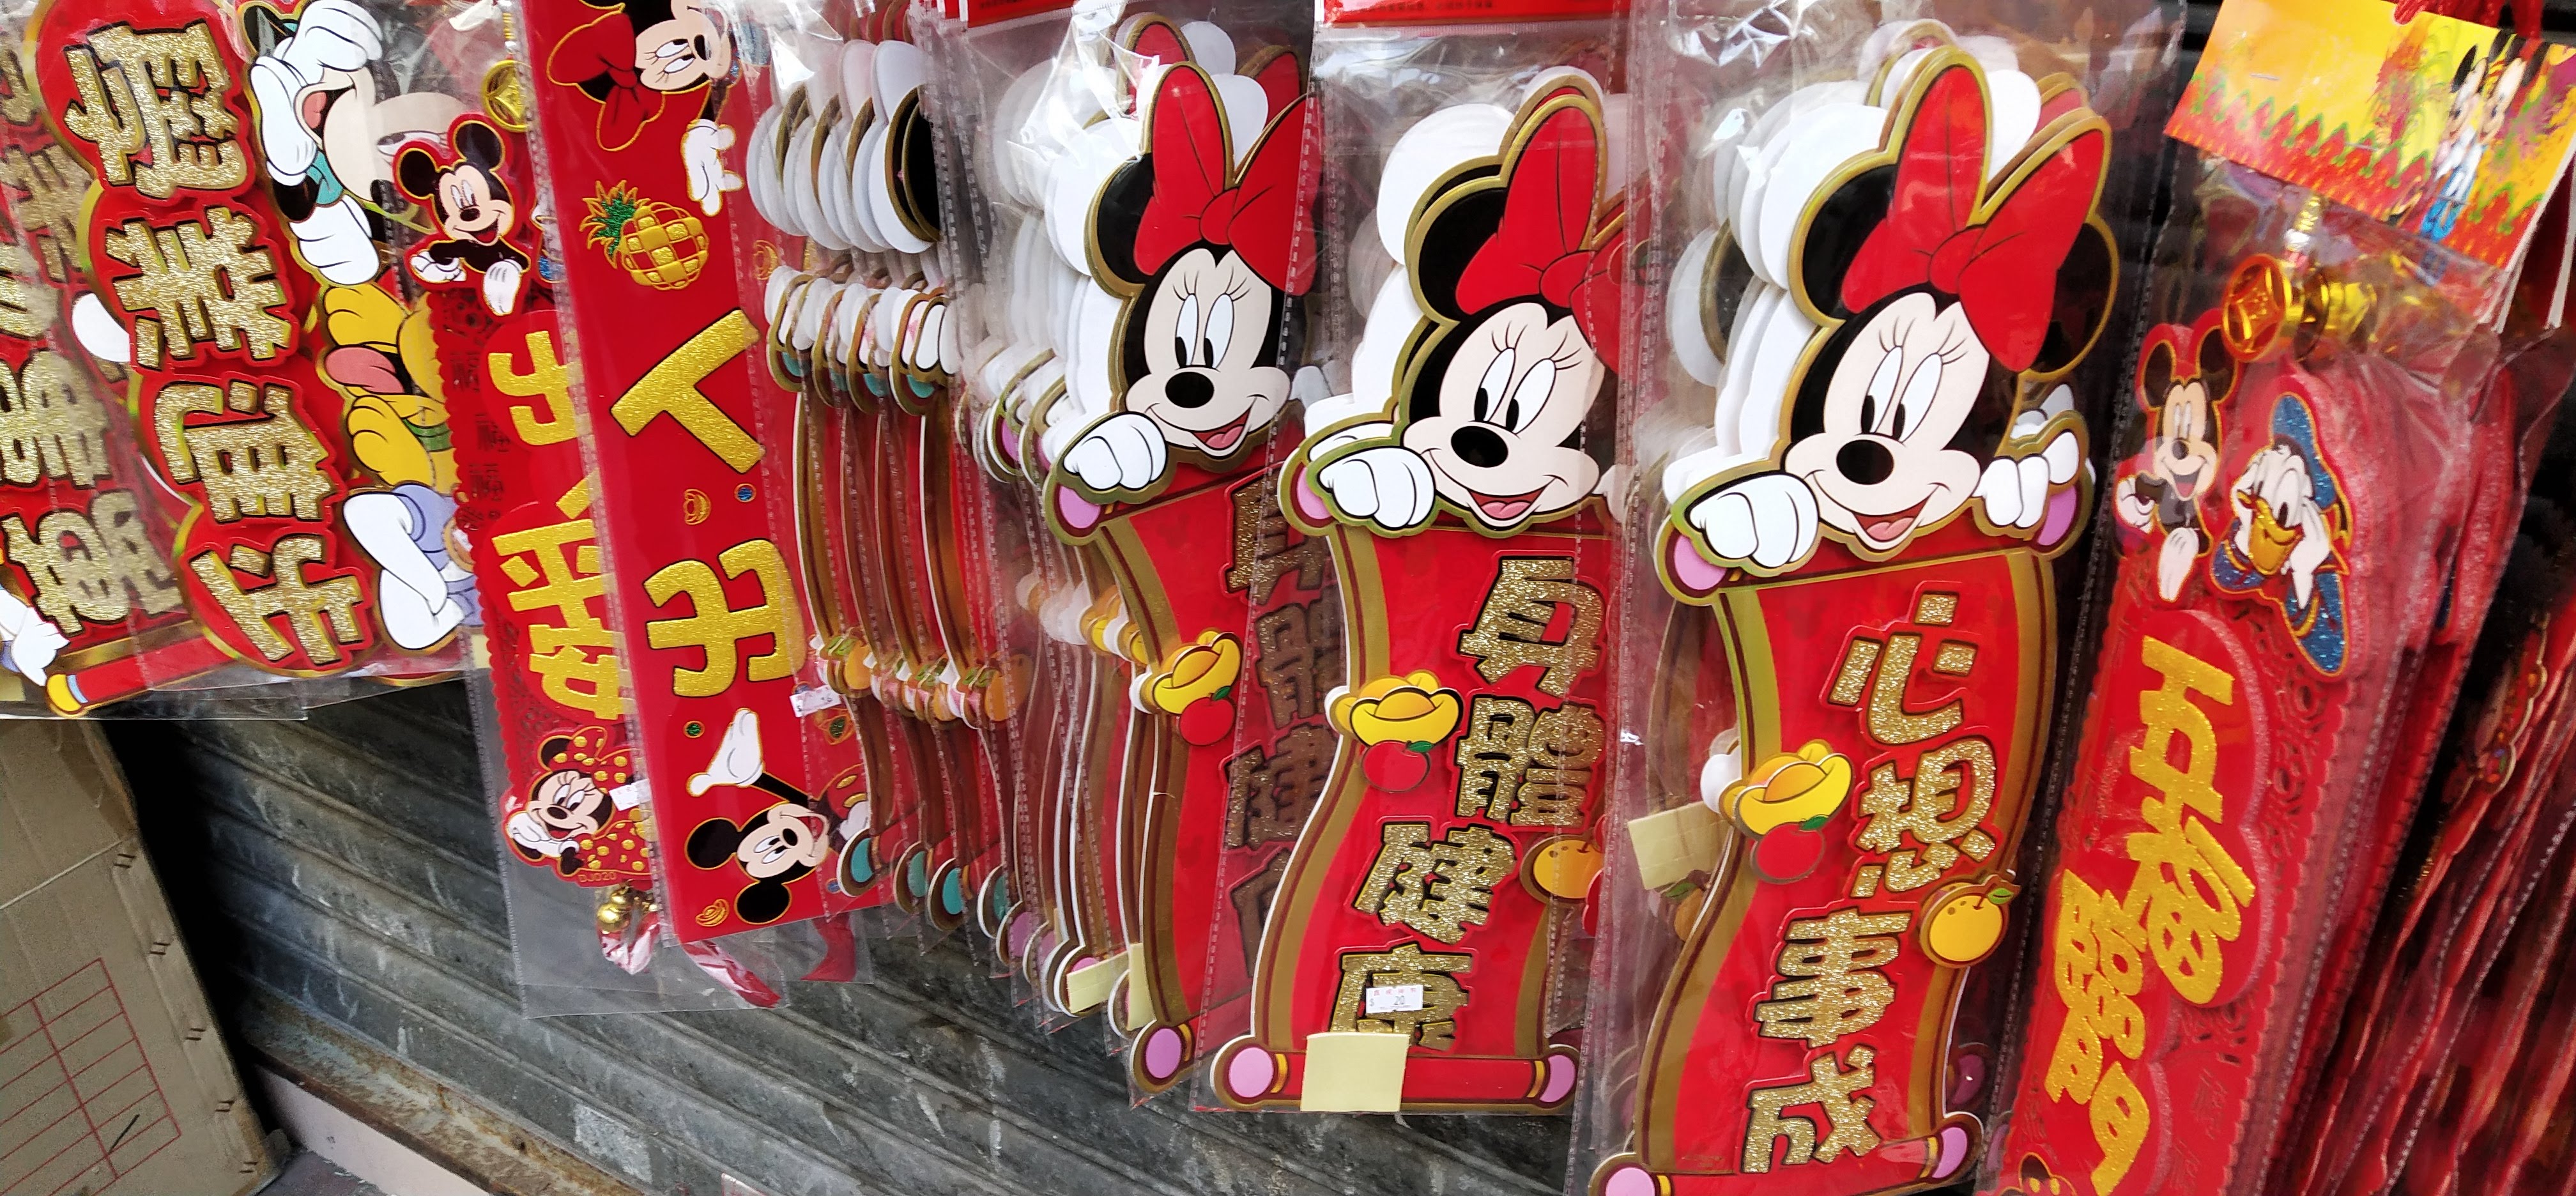 Red banners with Mickey Mouse